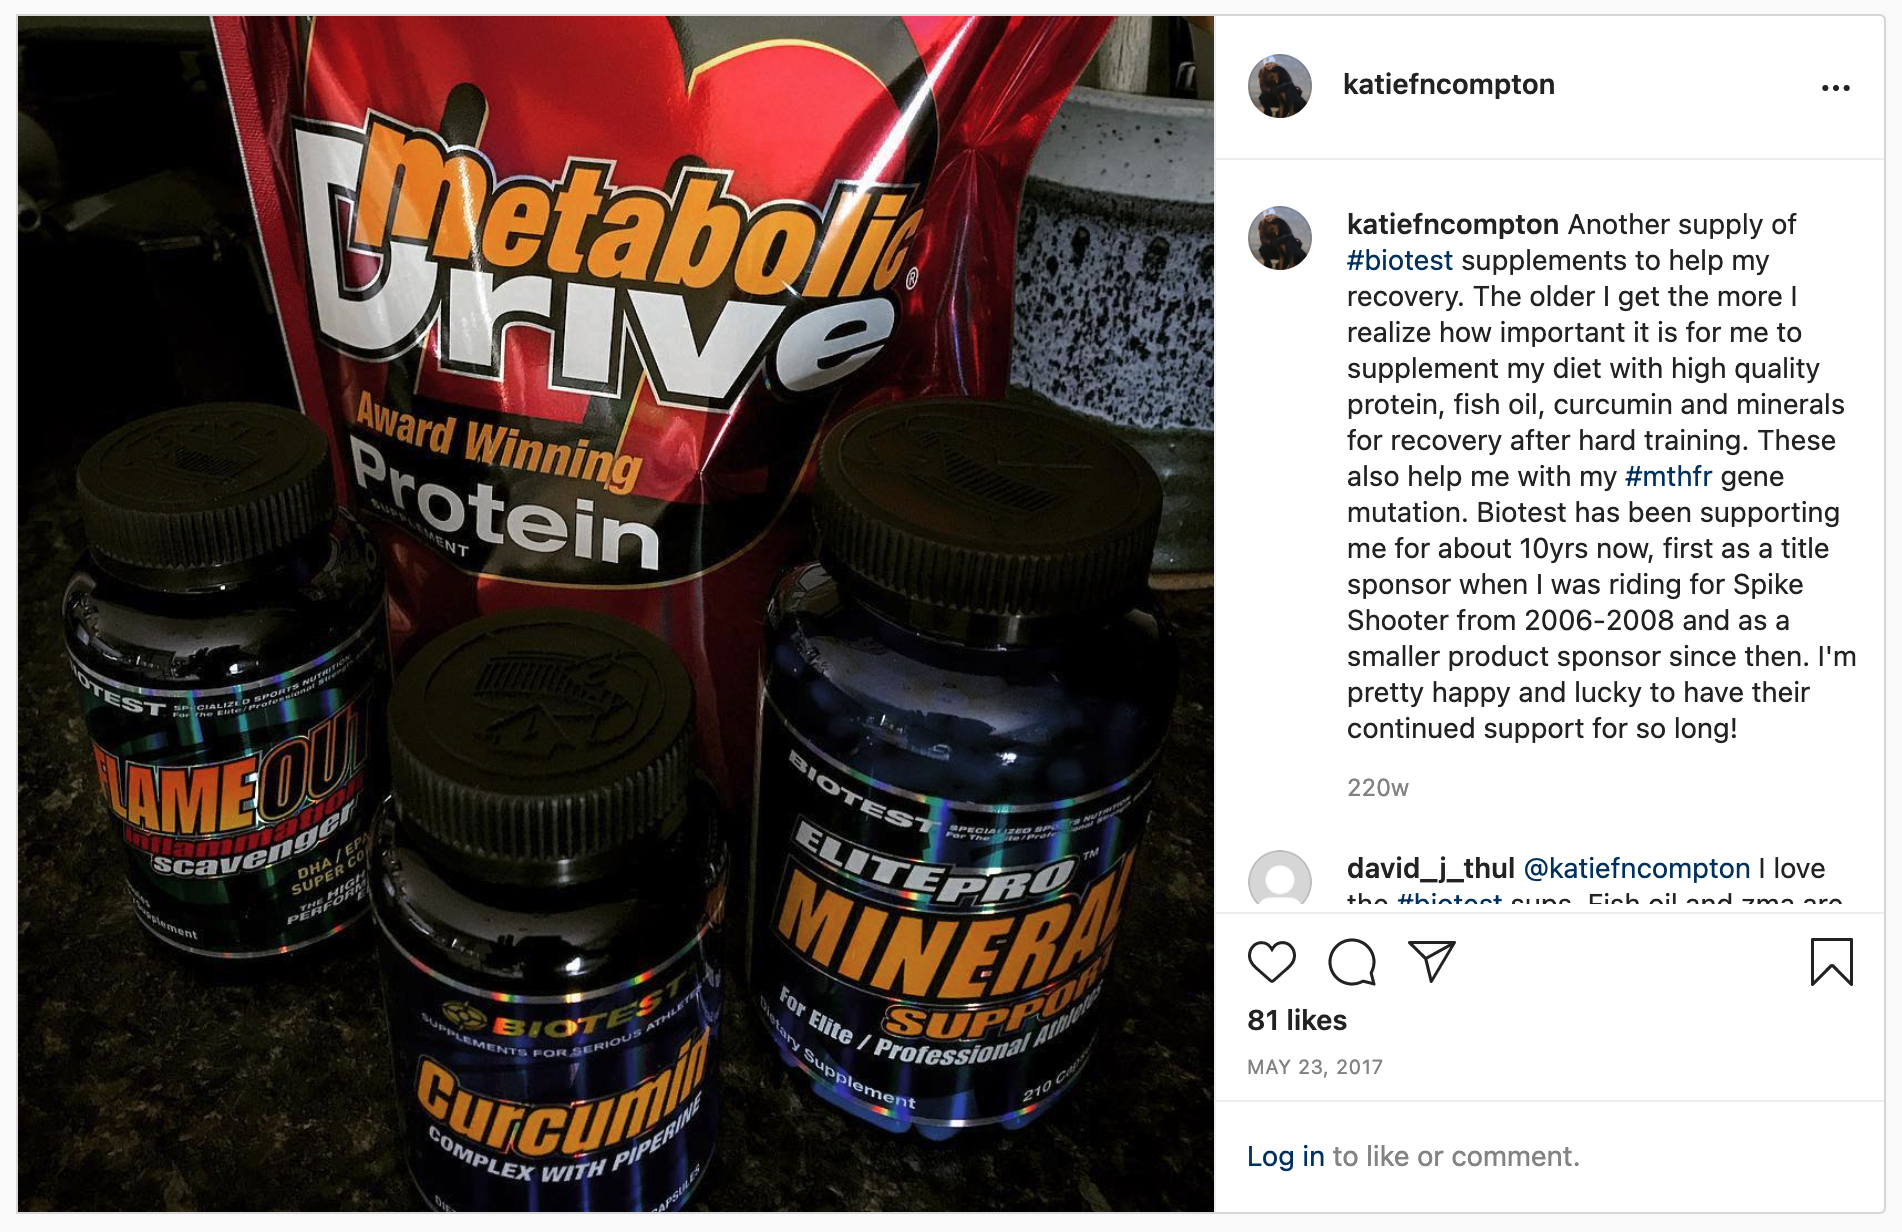 a sponsored Katie Compton instagram post for BioTest supplements.